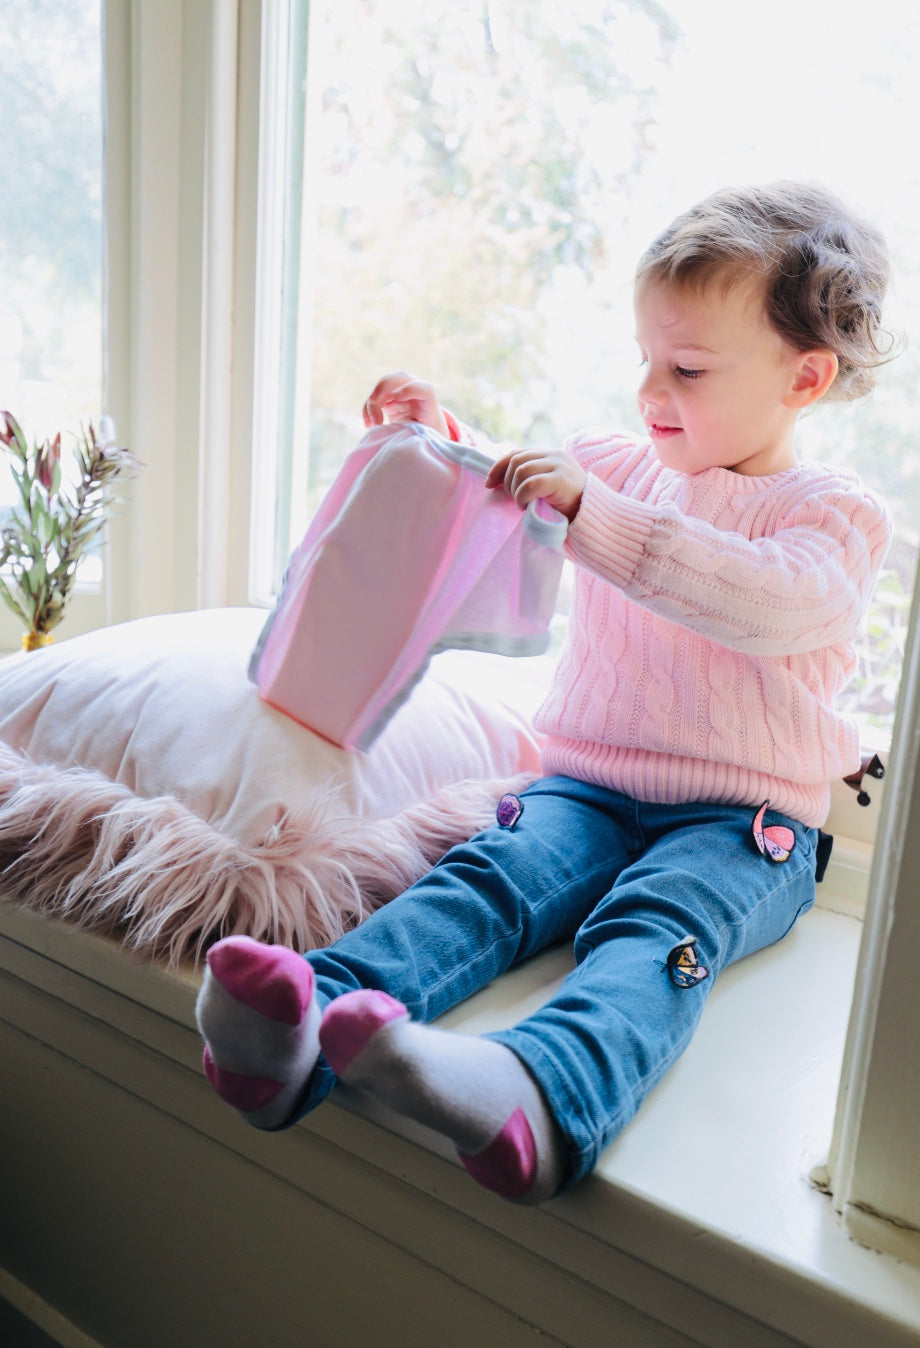 Toddler girl in a pink jumper sitting by a light filled window holding a pair of pink incontinence briefs